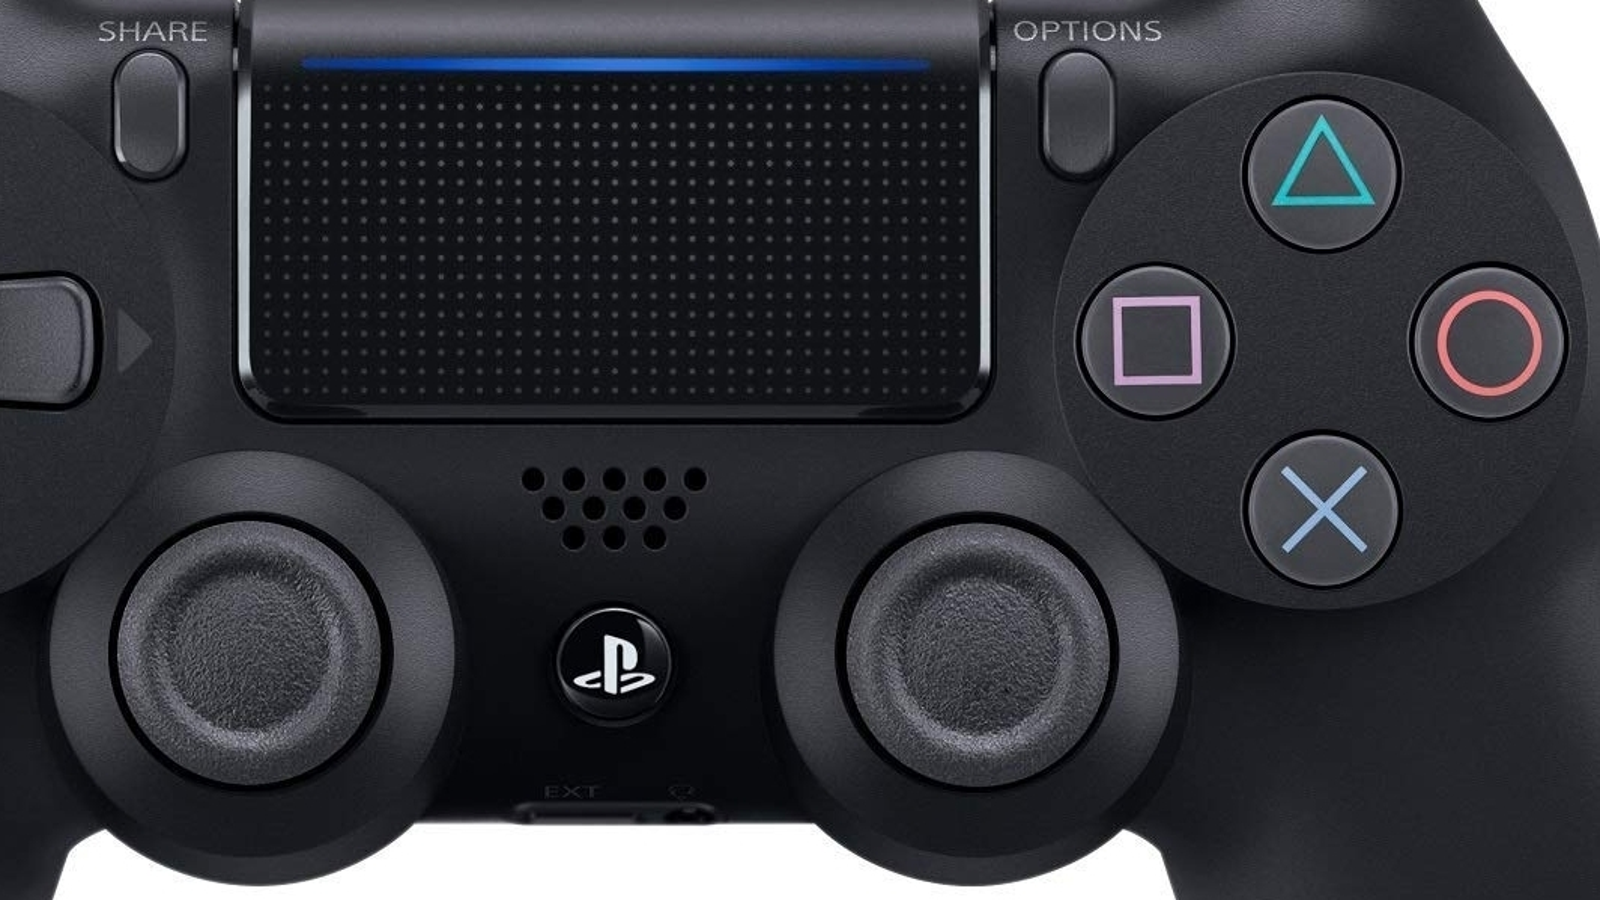 Dualshock 4 steam buttons фото 67